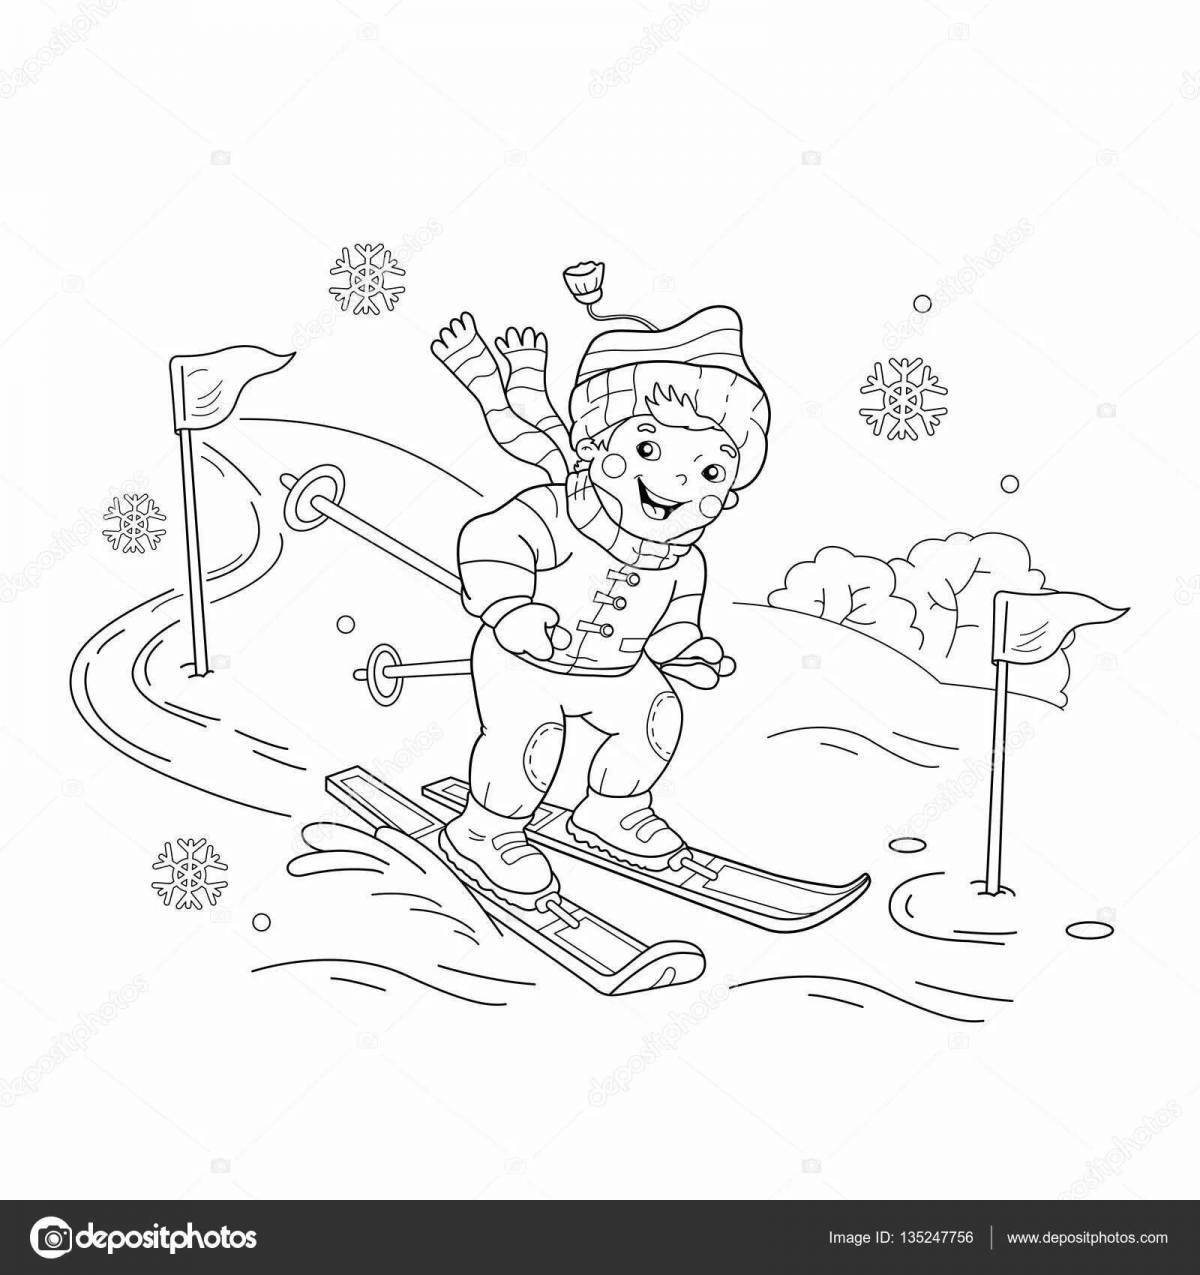 Coloring book funny skier for children 5-6 years old